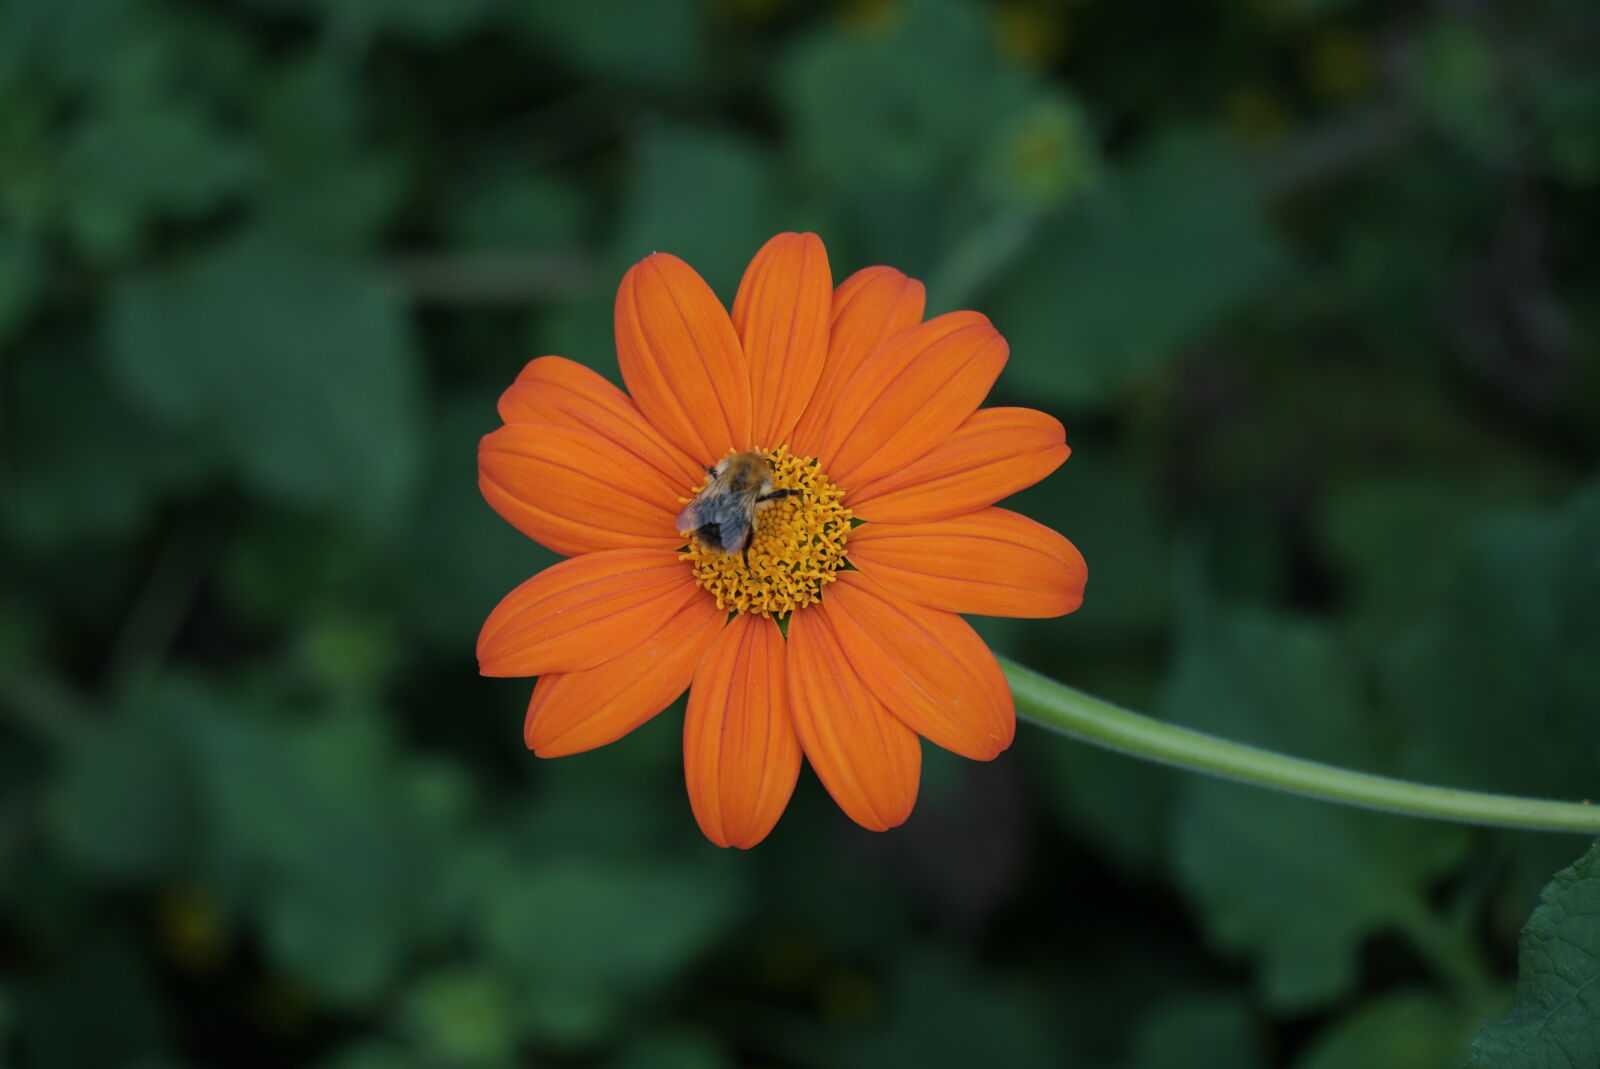 Sony a6000 + Sony E PZ 18-105mm F4 G OSS sample photo. Bumblebee, flower, insect, summer photography